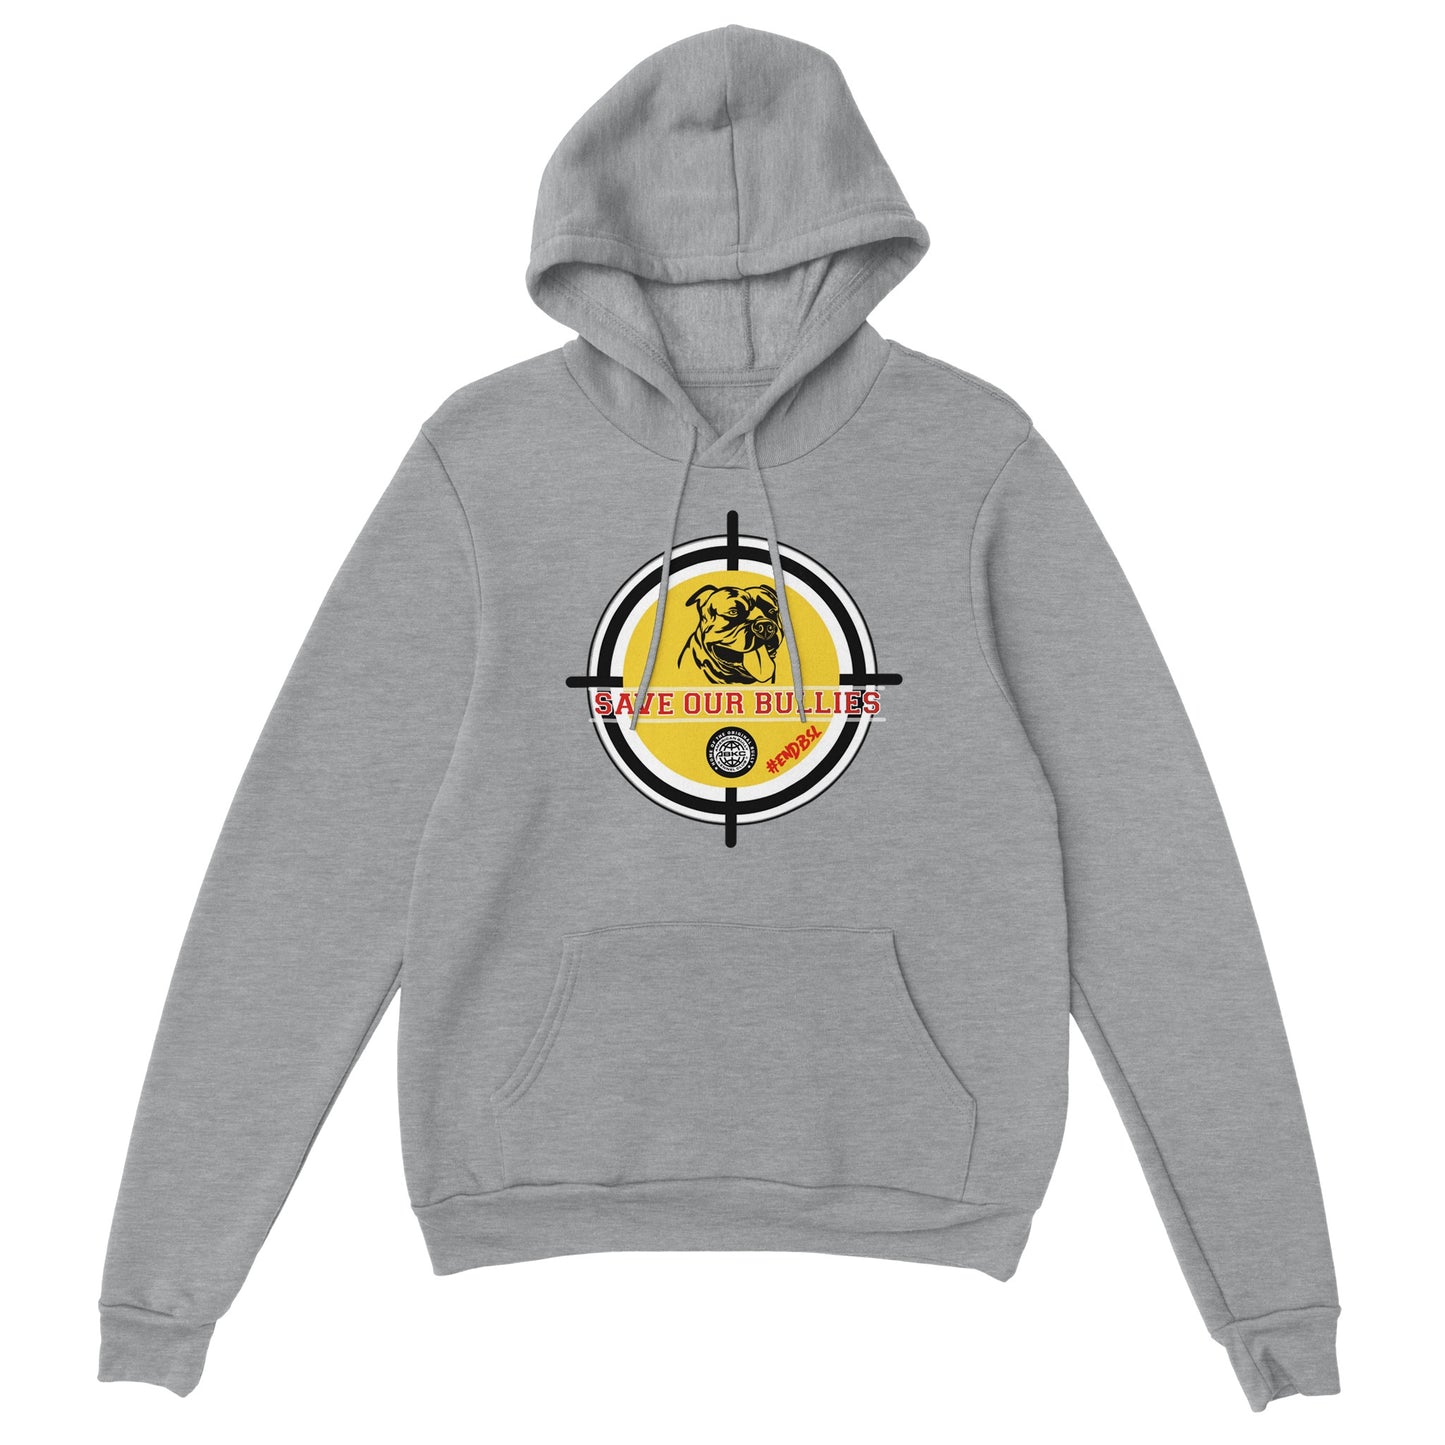 Save Our Bullies Official Unisex Hoodie